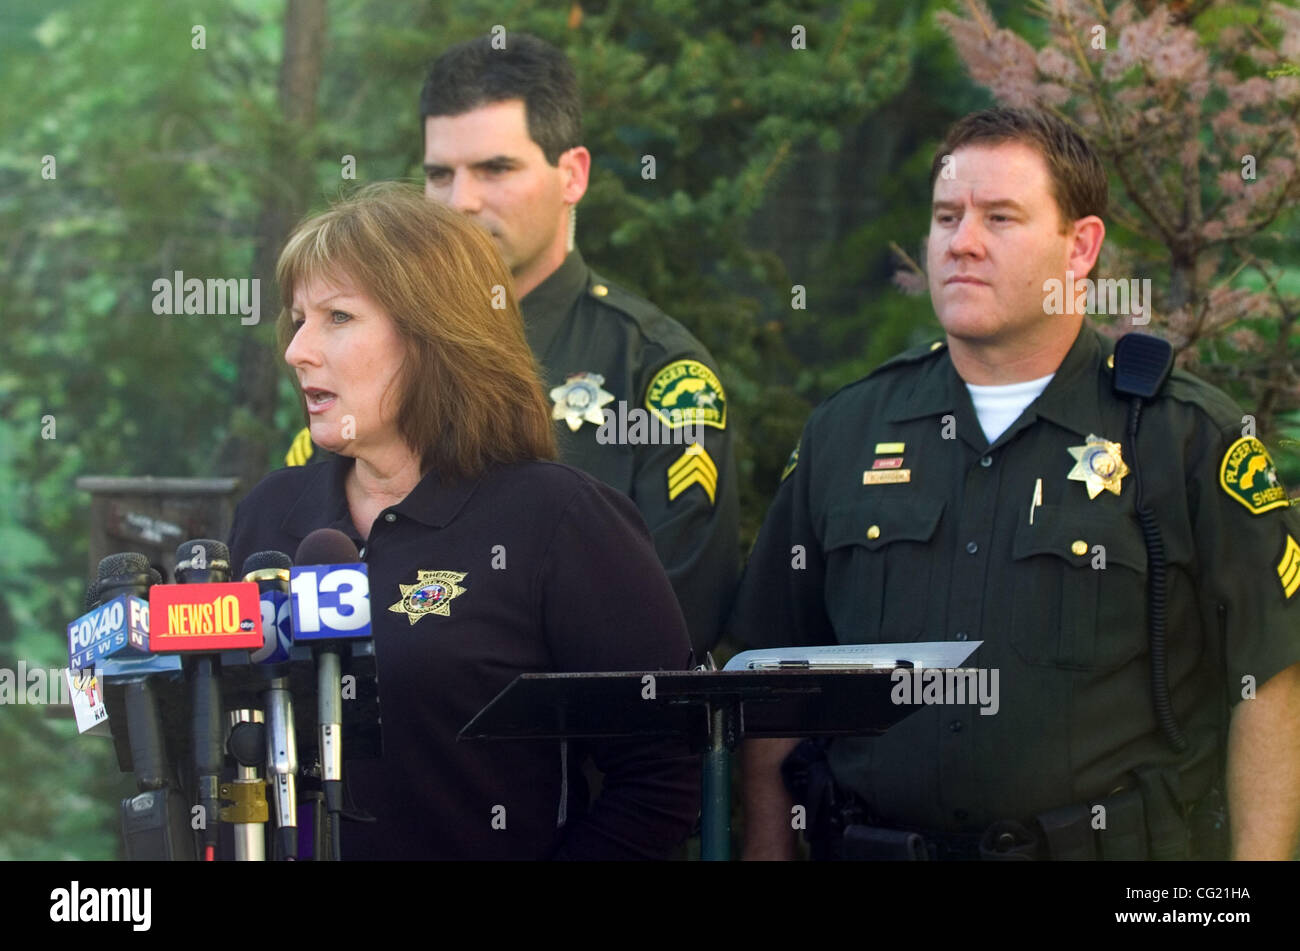 Placer County Sheriff public information officer Dena Erwin, left, briefs the media about the circumstances surrounding the arrest of Sacramento King Ron Artest Monday, March 5, 2007 in Auburn, Calif. Artest was arrested and charged with domestic violence and using force or violence to prevent his v Stock Photo